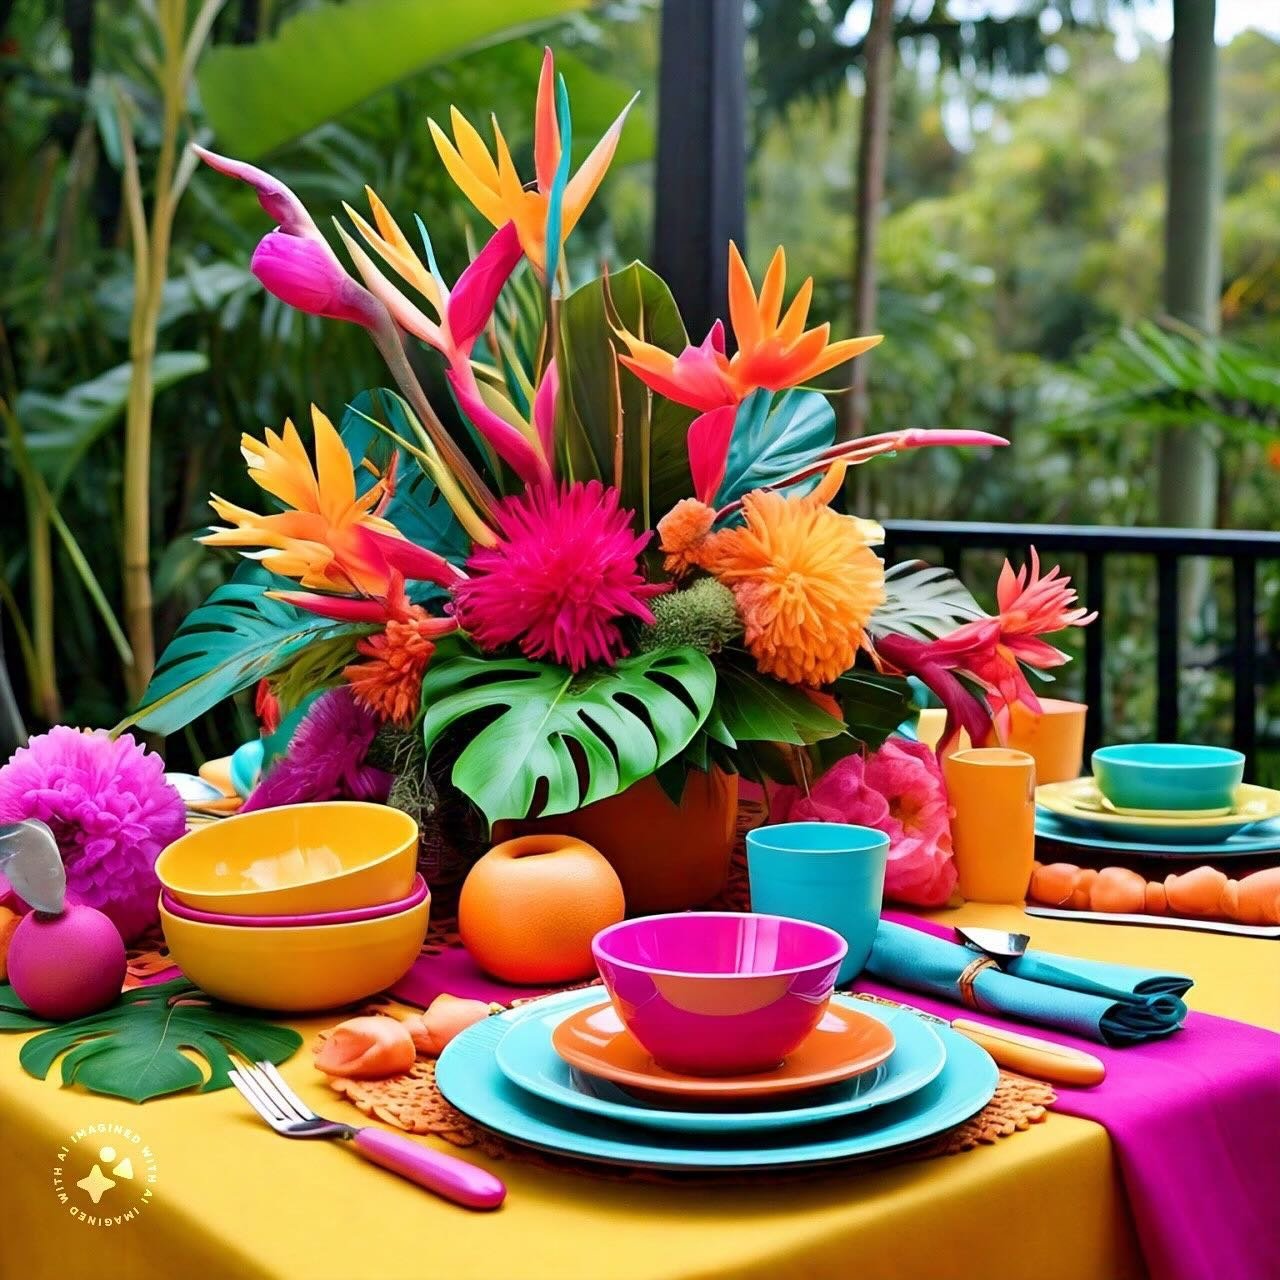 I asked AI for an image that would inspire using bright colors for a summer dinner party. What do you think? Would you like to dine here? I&rsquo;d love to have this set of dishes! How about you?